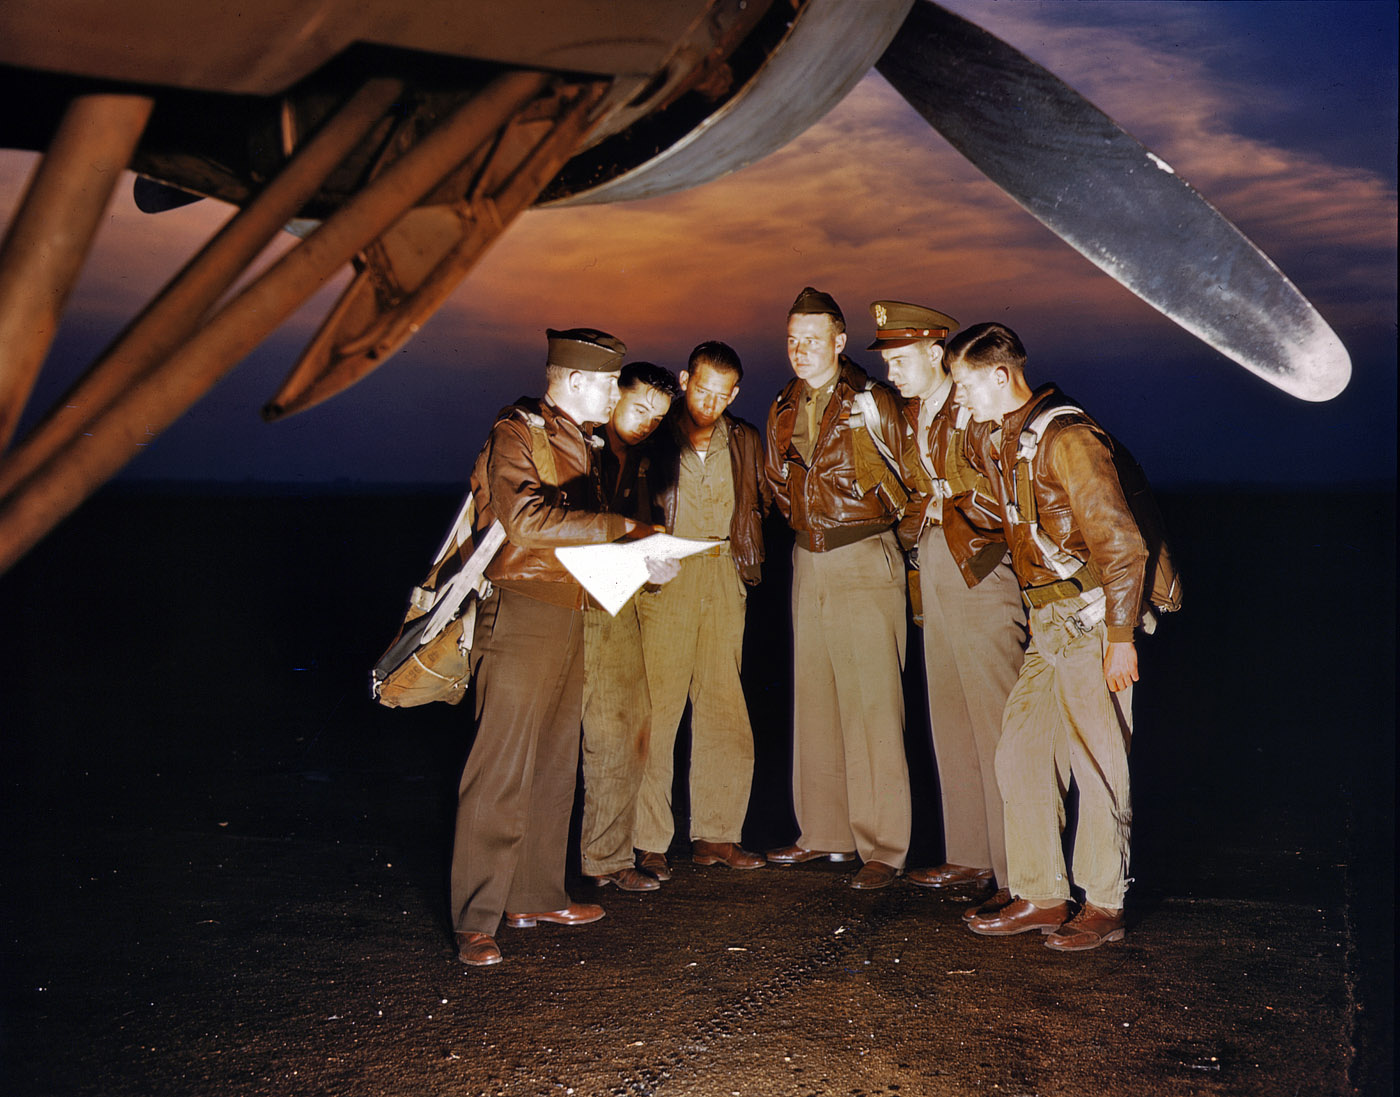 May 1942. "Here's our mission." A combat crew receives final instructions just before taking off in a mighty YB-17 bomber from the bombardment squadron base at Langley Field, Virginia, nation's oldest air base. View full size. 4x5 Kodachrome transparency by Alfred Palmer for the Office of War Information.